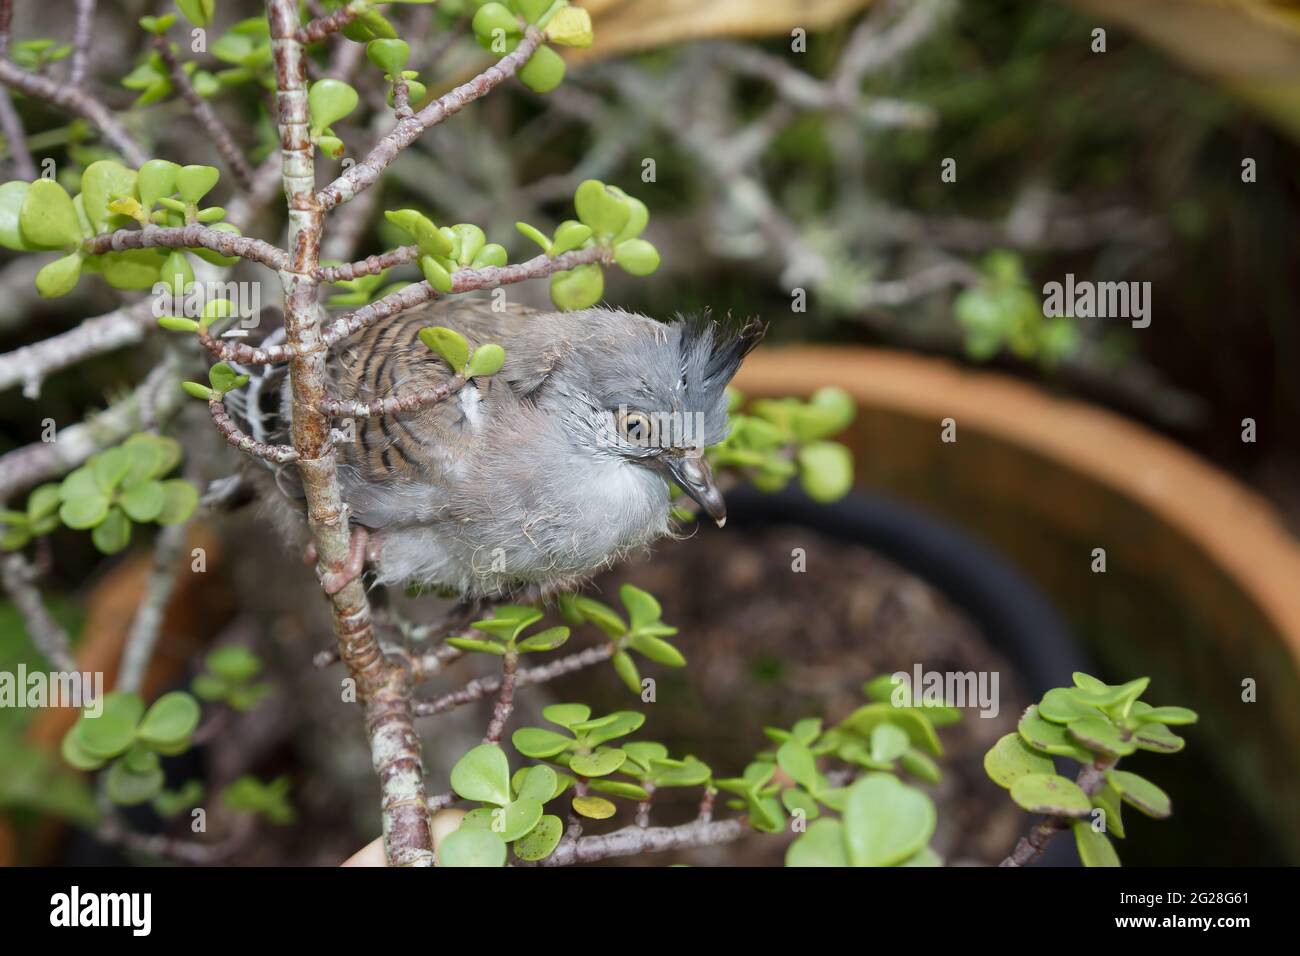 A fledgling native Australian crested pigeon (Ocyphaps lophotes) also known as a topknot pigeon, has crash landed on his first flight into a jade bush Stock Photo